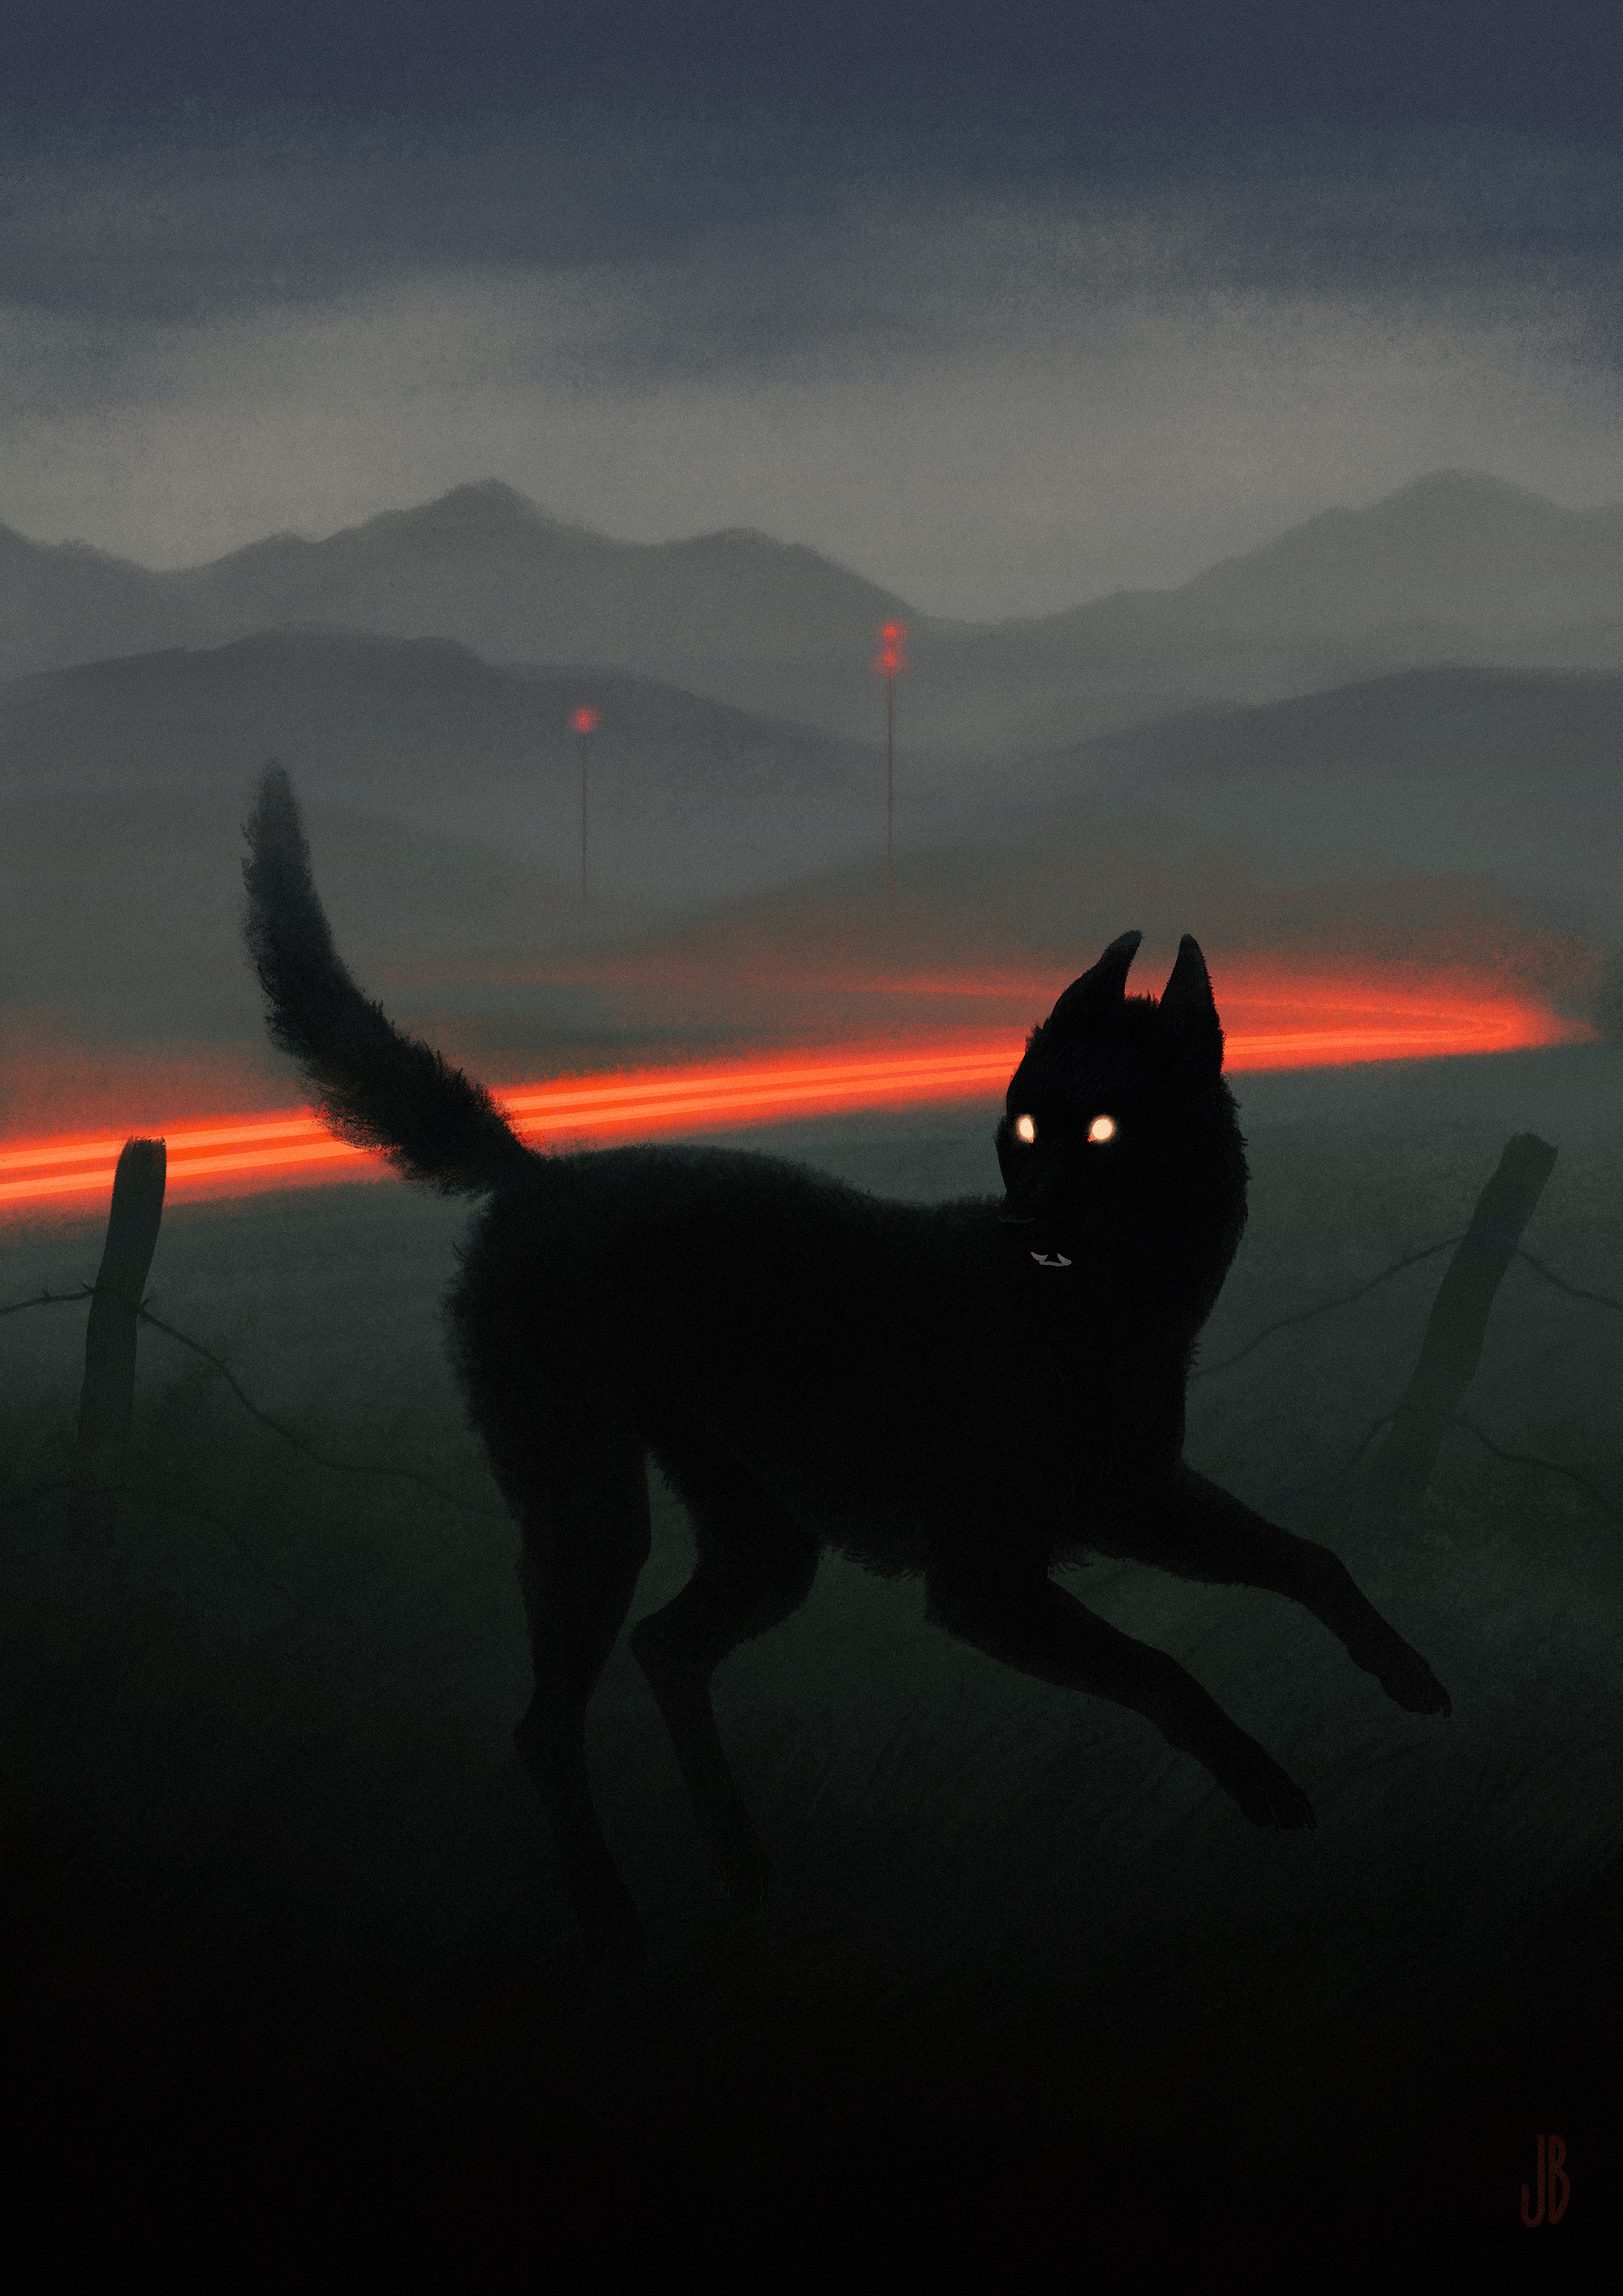 Shadowy Animals Infiltrate Desolate Spaces in Illustrations by Jenna Barton